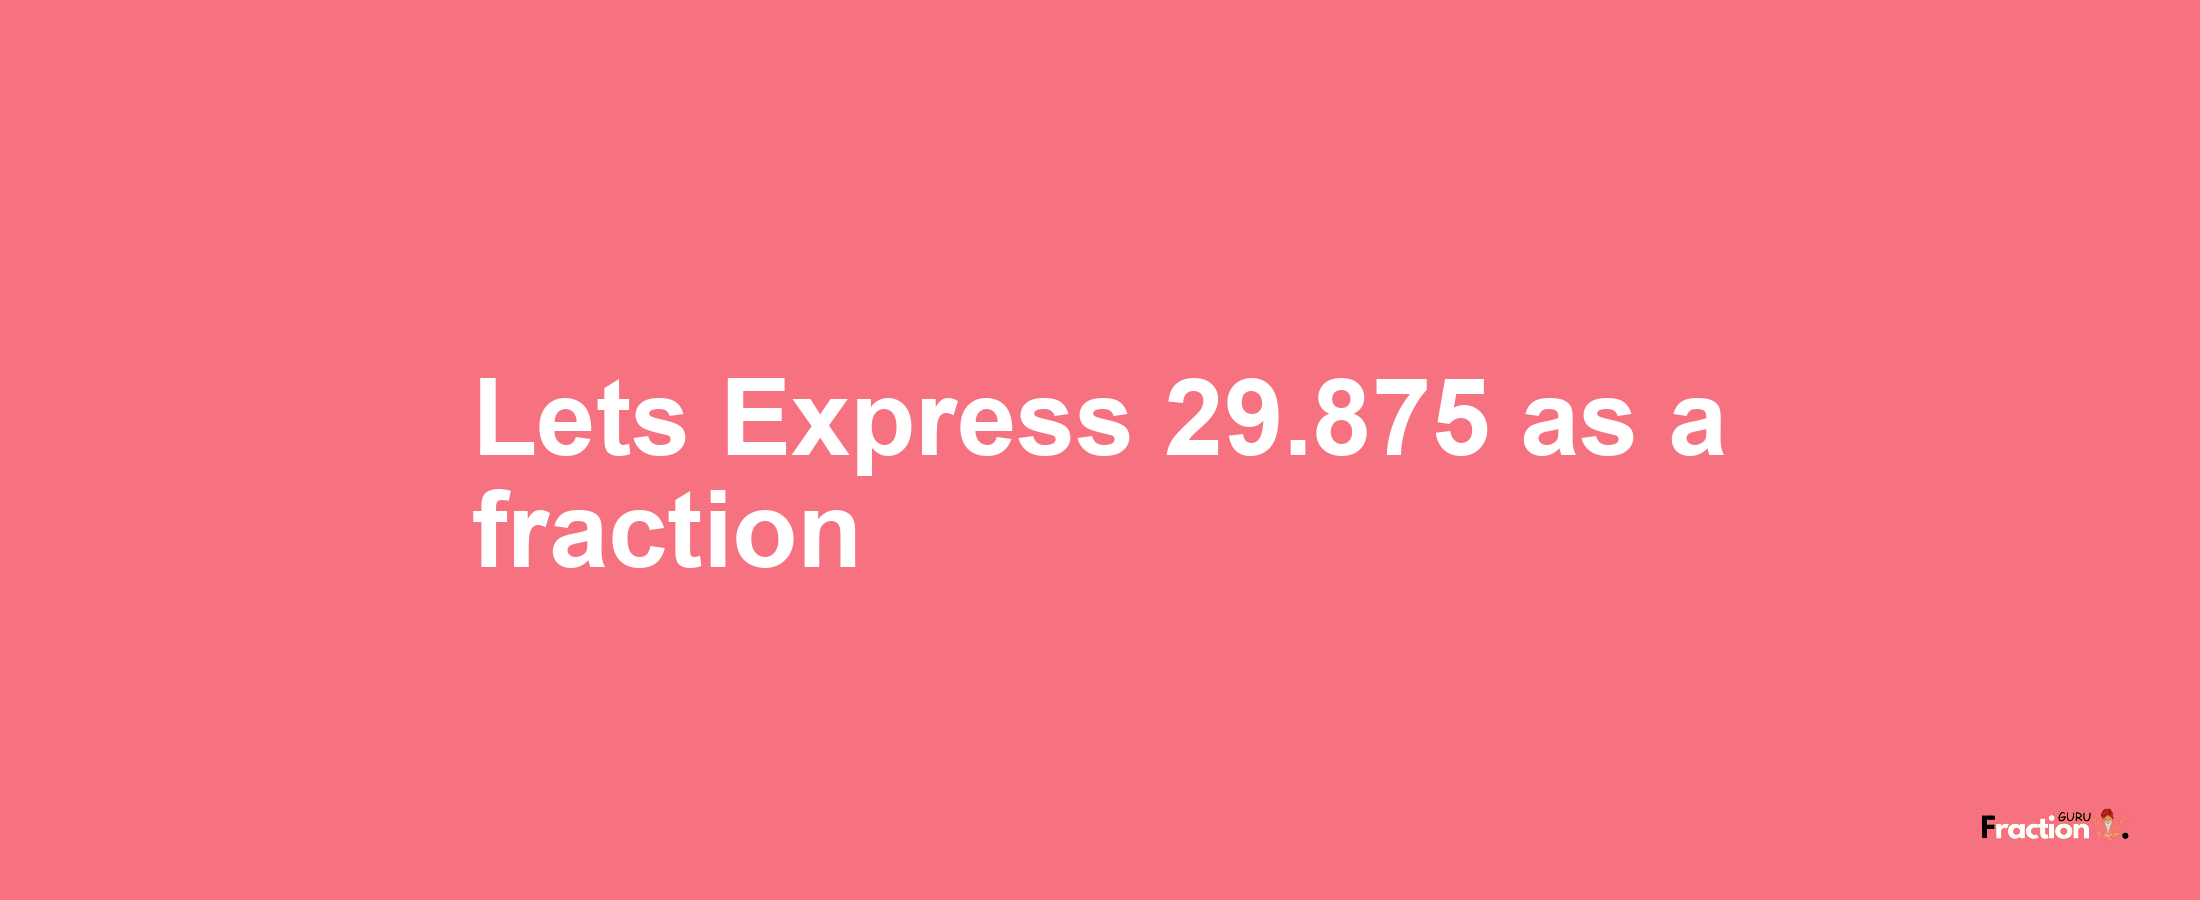 Lets Express 29.875 as afraction